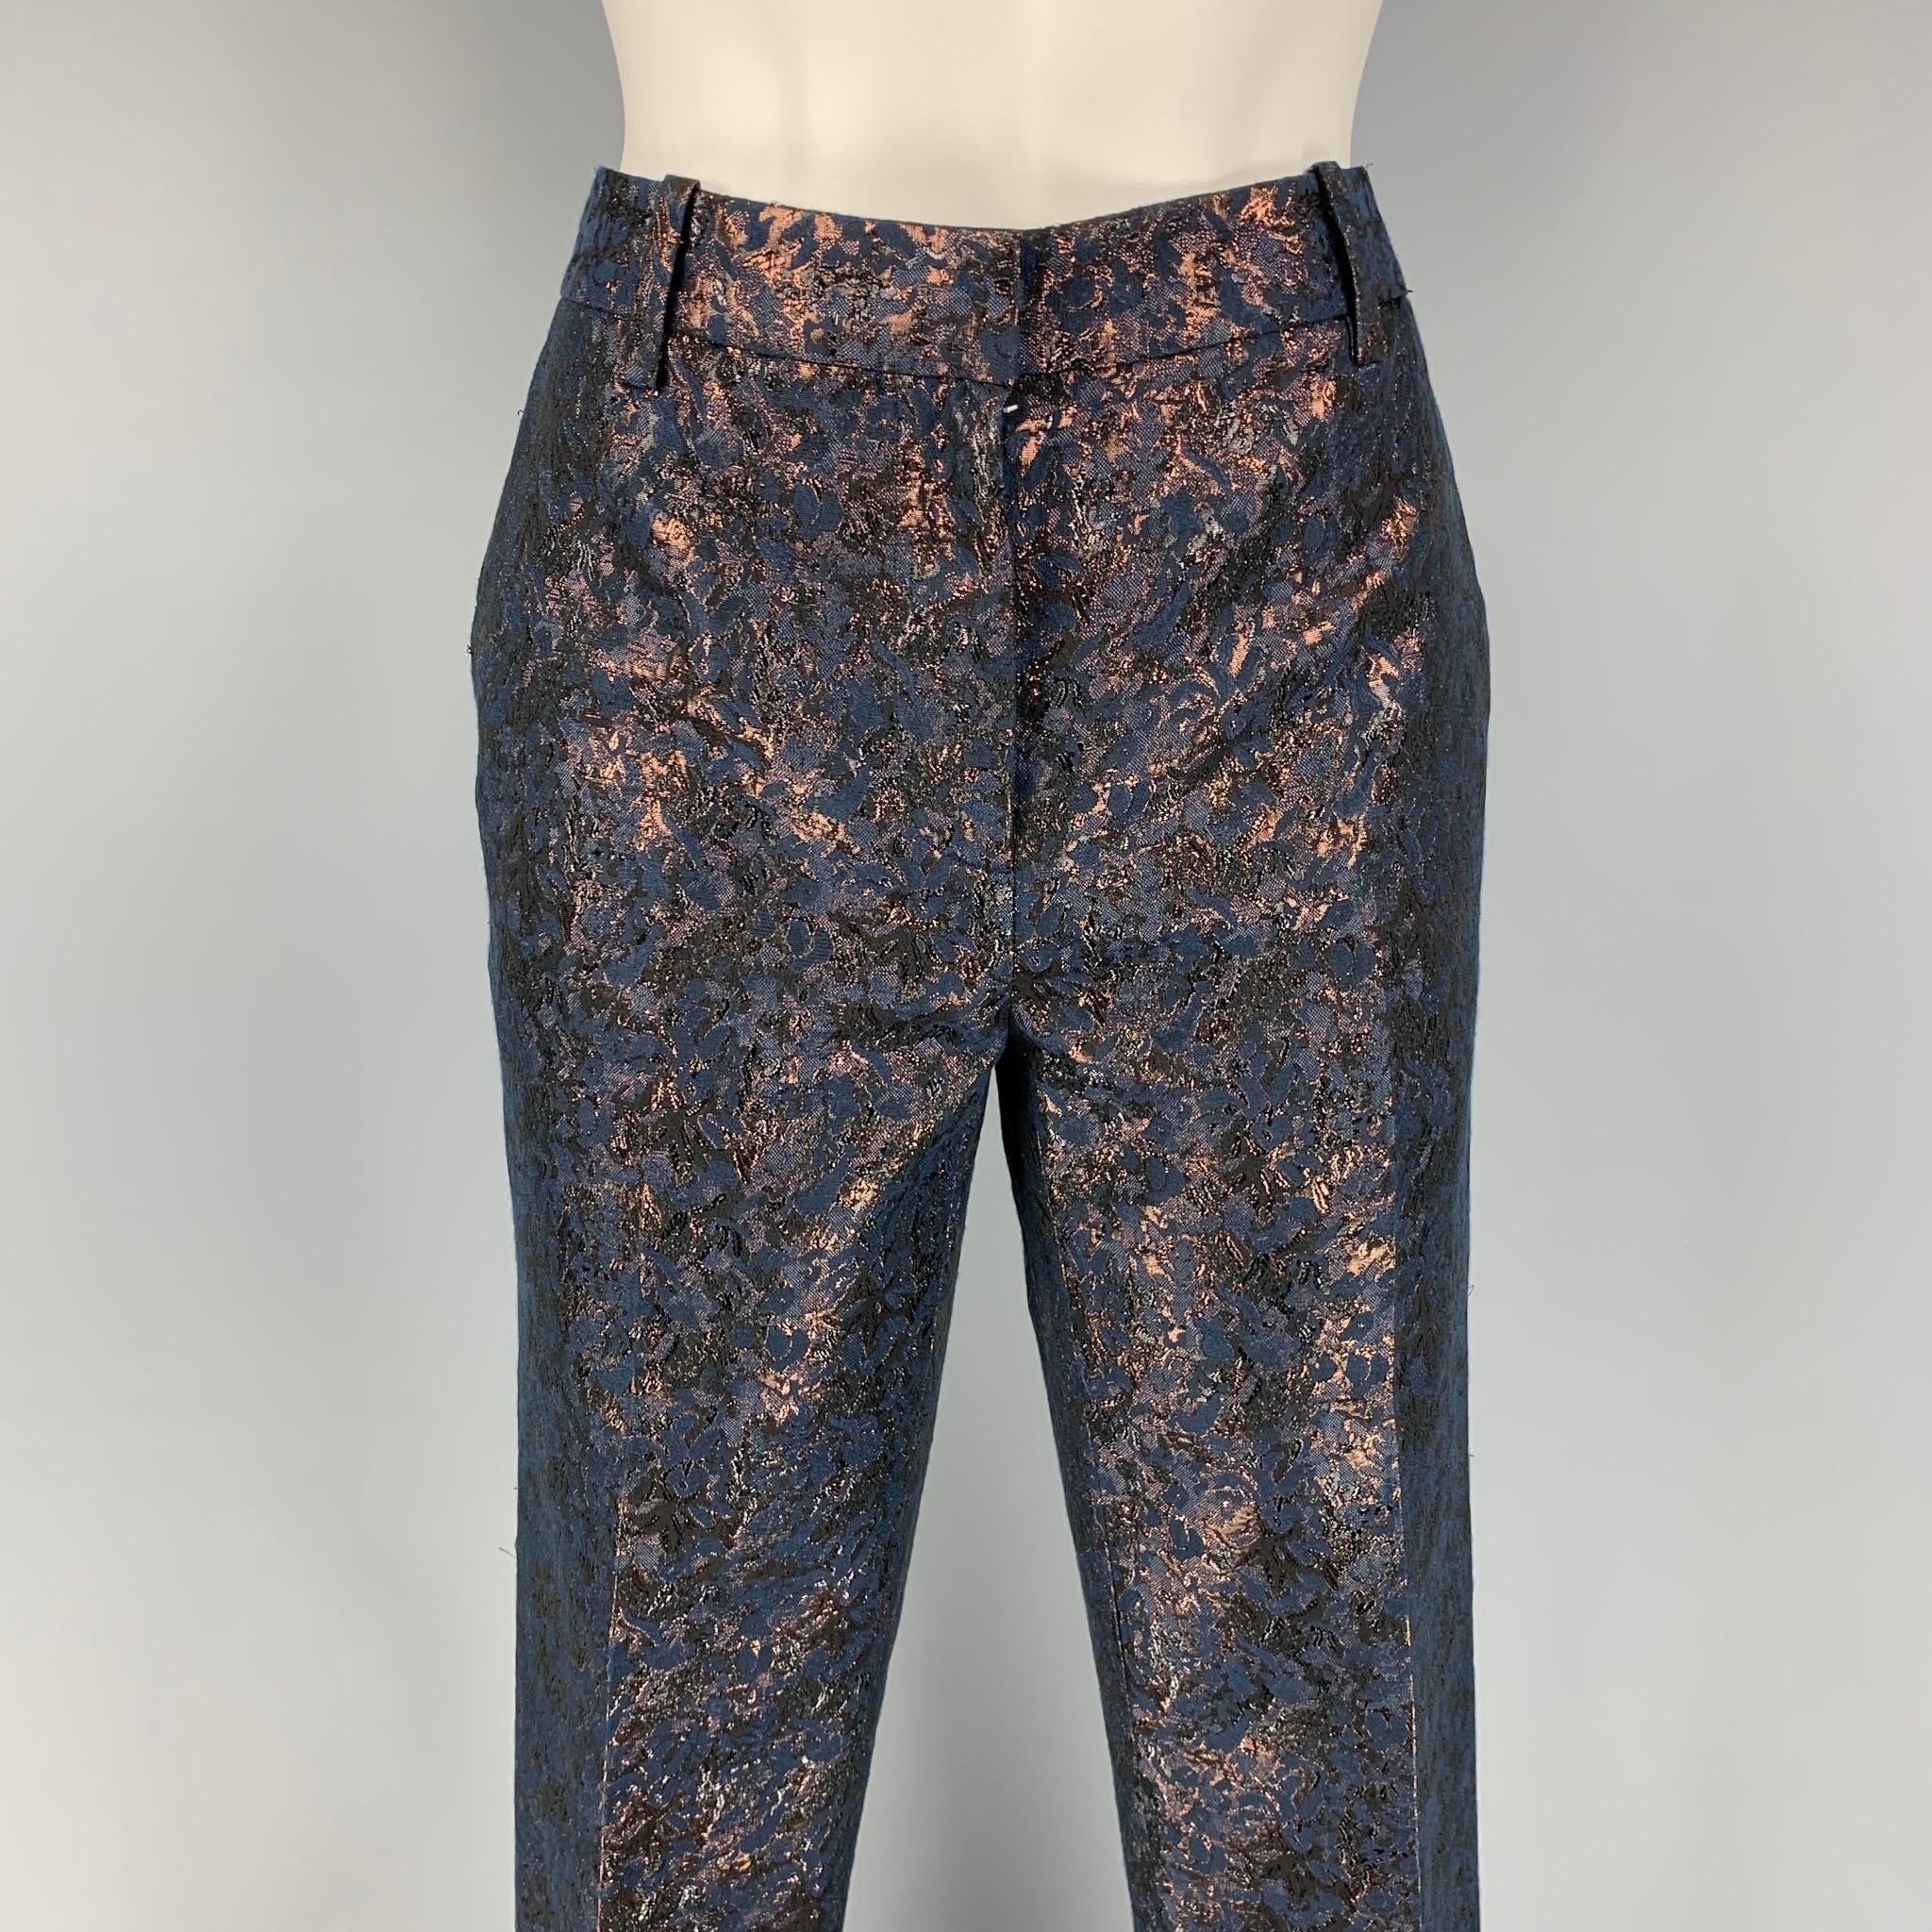 3.1 PHILLIP LIM dress pants comes in a navy & copper polyester / cotton featuring a narrow leg, front tab, and a zip fly closure. 

Very Good Pre-Owned Condition.
Marked: 2

Measurements:

Waist: 30 in.
Rise: 10 in.
Inseam: 26.5 in. 